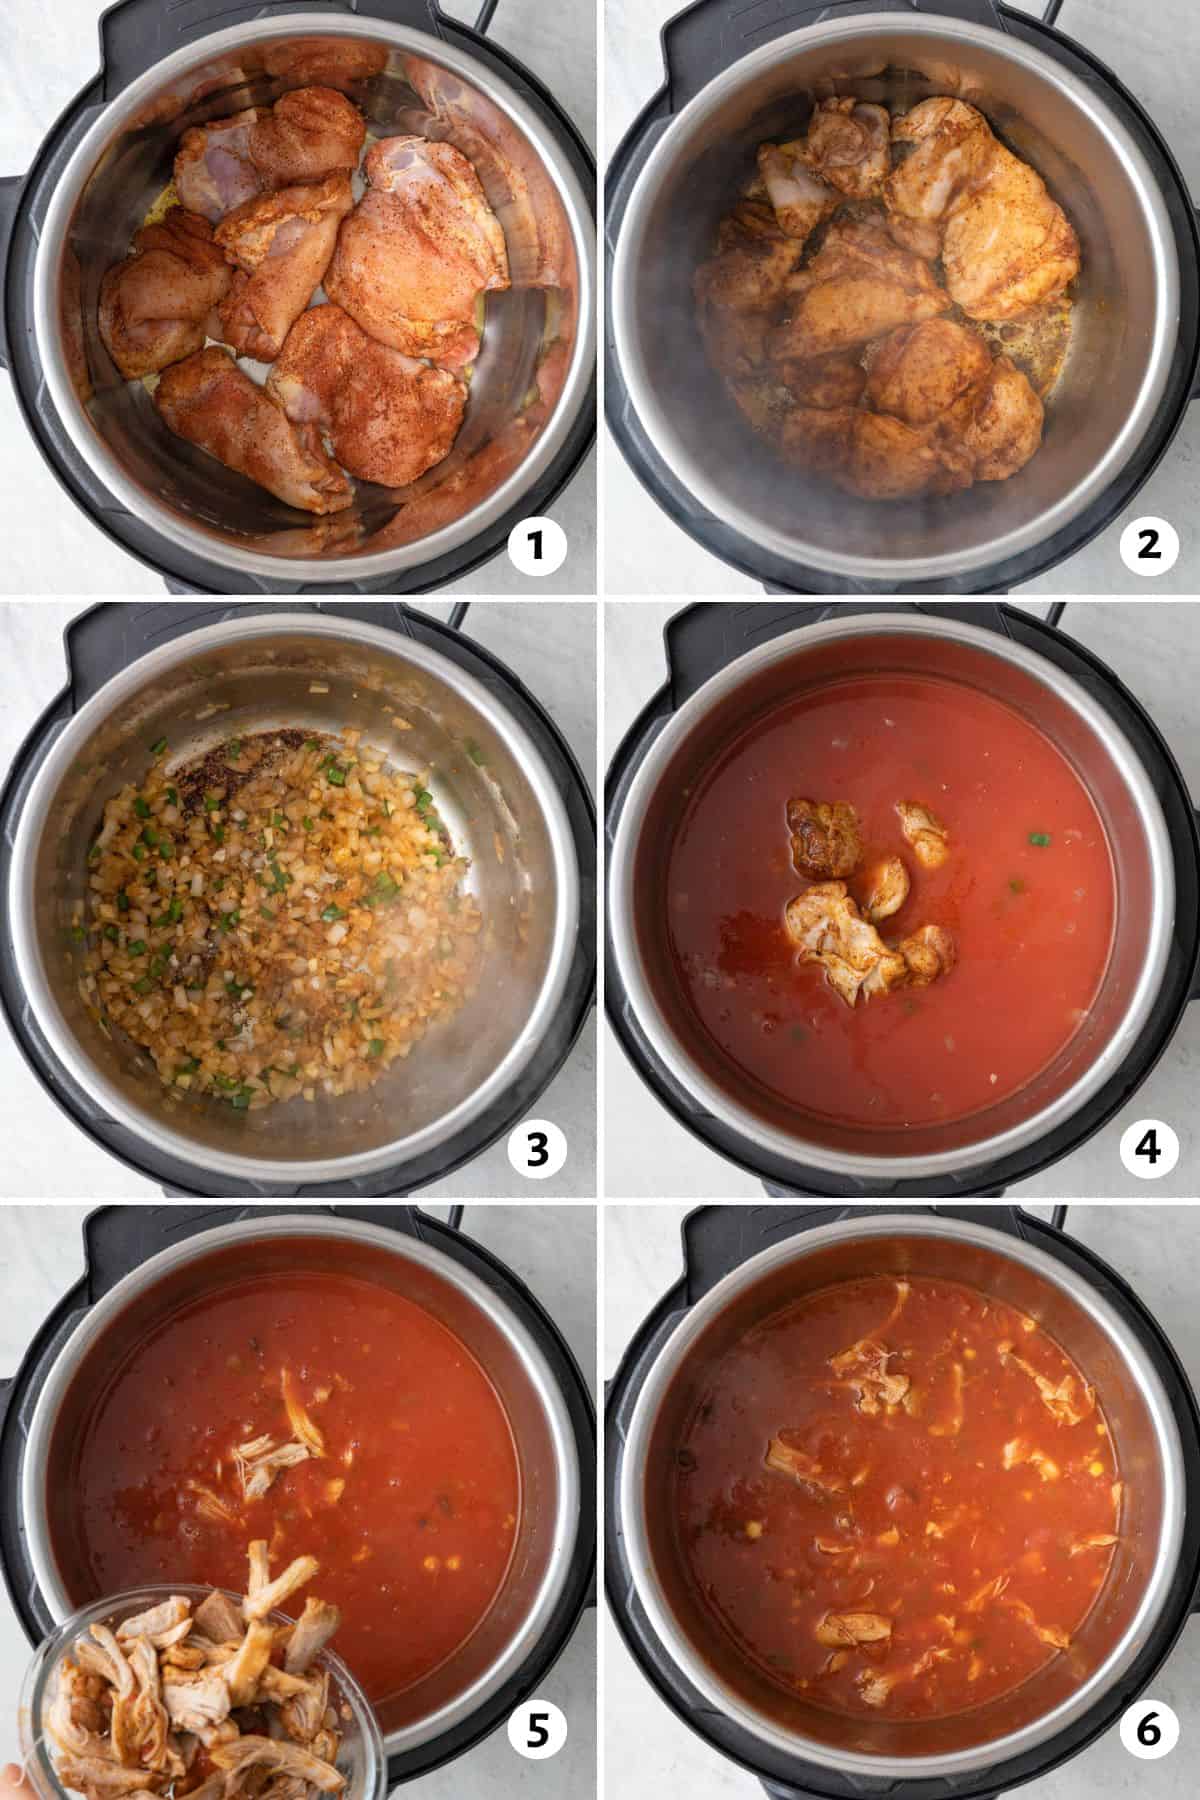 6 image collage making recipe in an Instant Pot: 1- seasoned chicken thighs in IP before cooking, 2- after flipping, 3- Thighs removed from IP. onions, jalapenos, and garlic added shown after cooked, 3- tomatoes, broth, and chicken added to veggies, 5- shredded chicken being added back into IP after cooking, and 6- final soup.